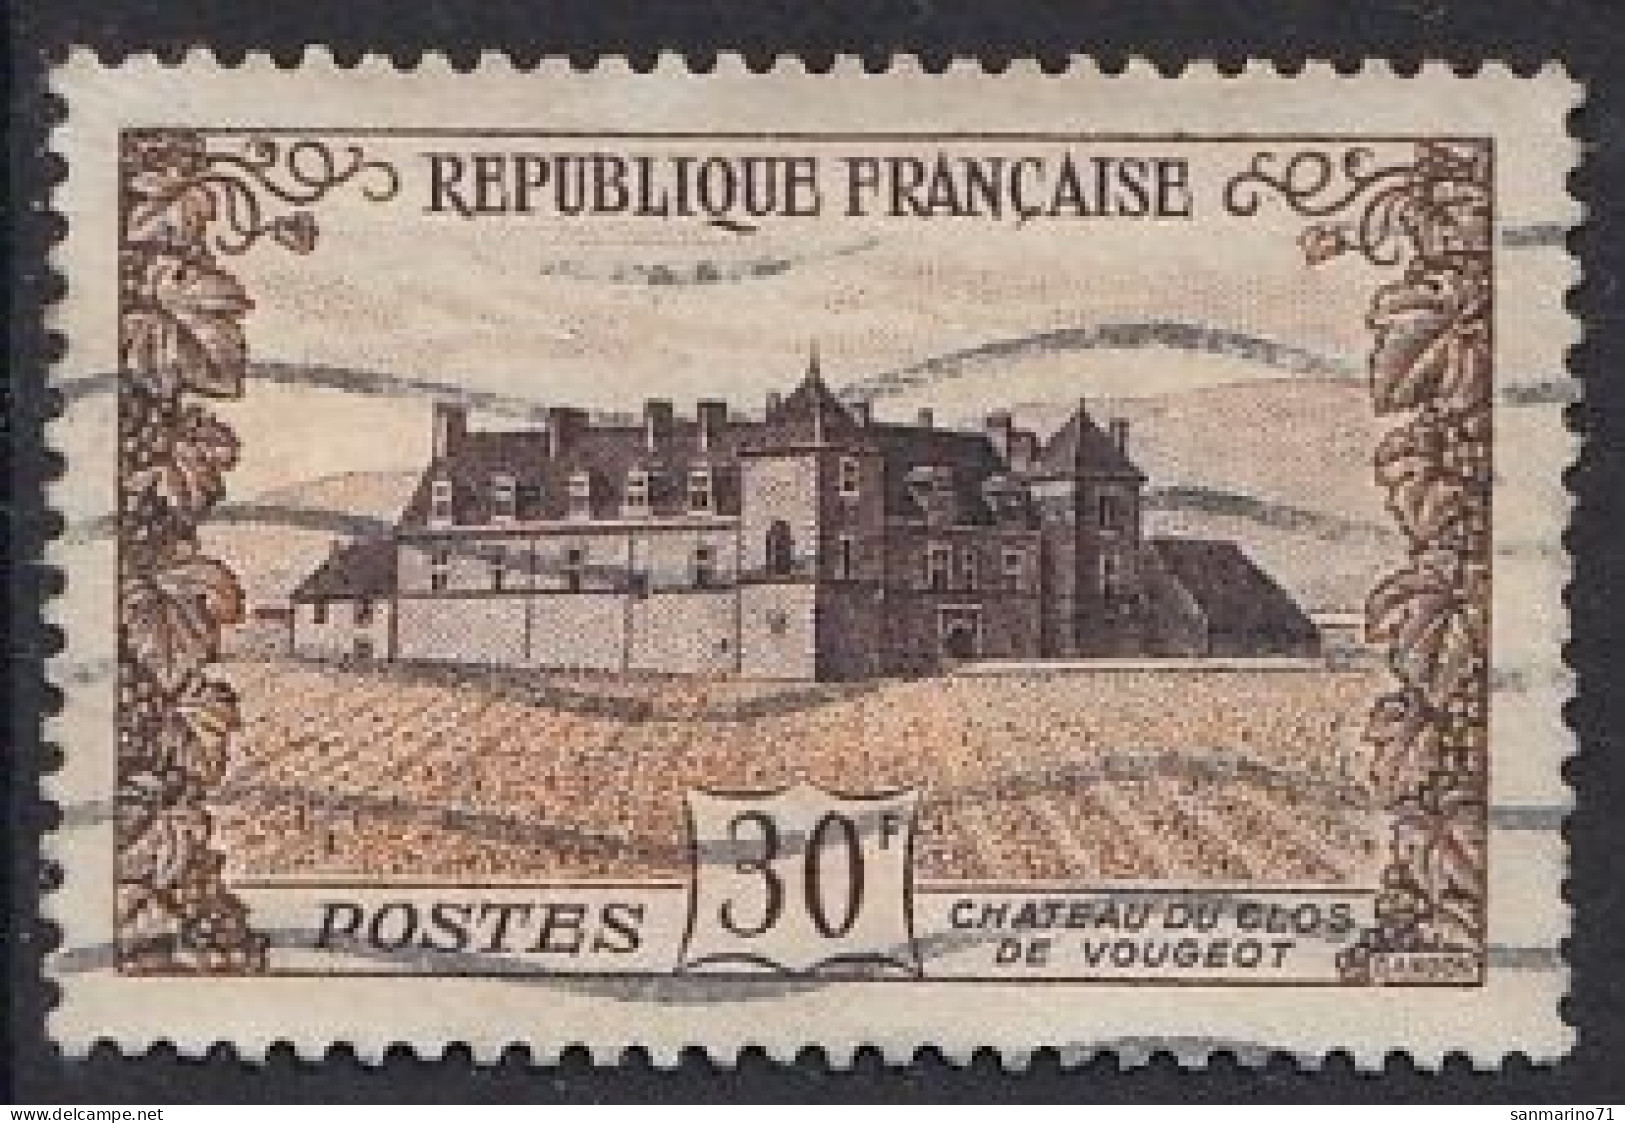 FRANCE 932,used - Châteaux